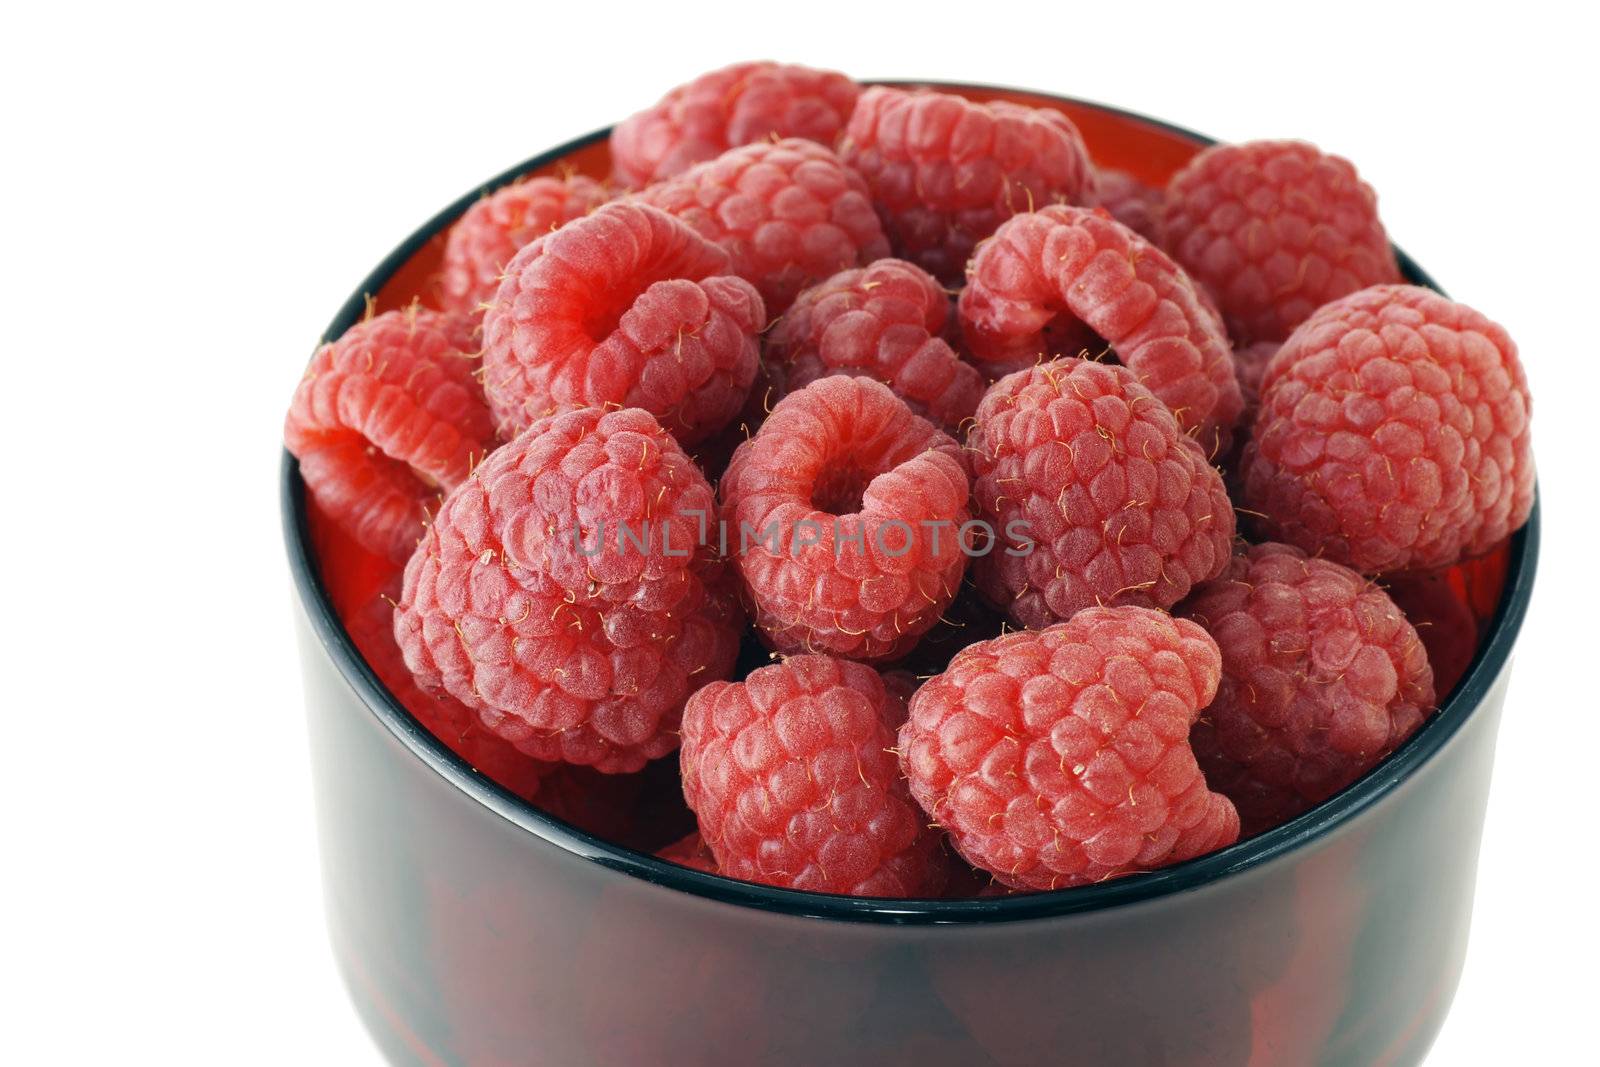 One serving of beautiful and delicious ripe raspberries in a red glass bowl on white background.